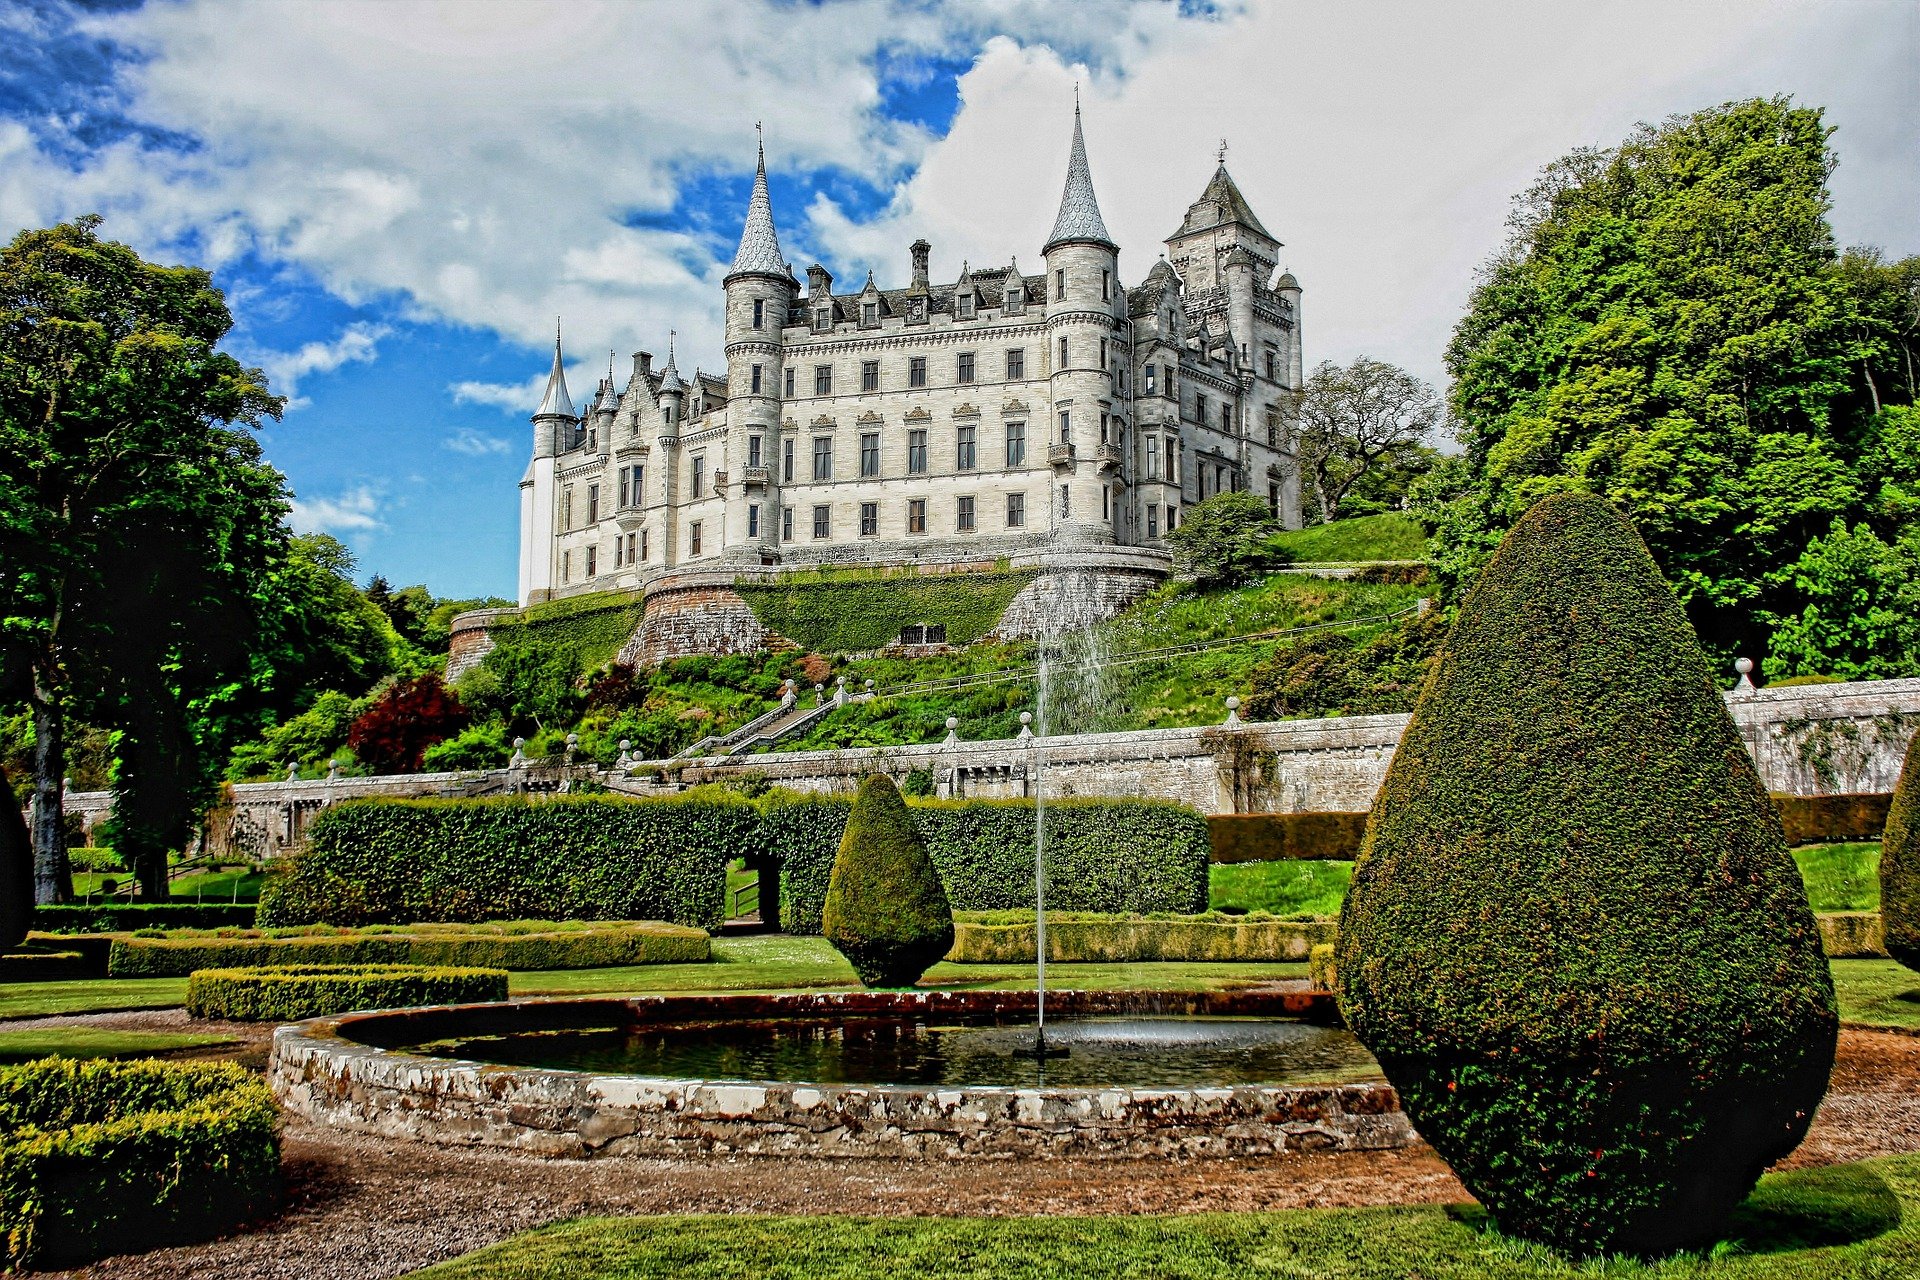 The white Dunrobin castle in Scotland with beautiful gardens in front